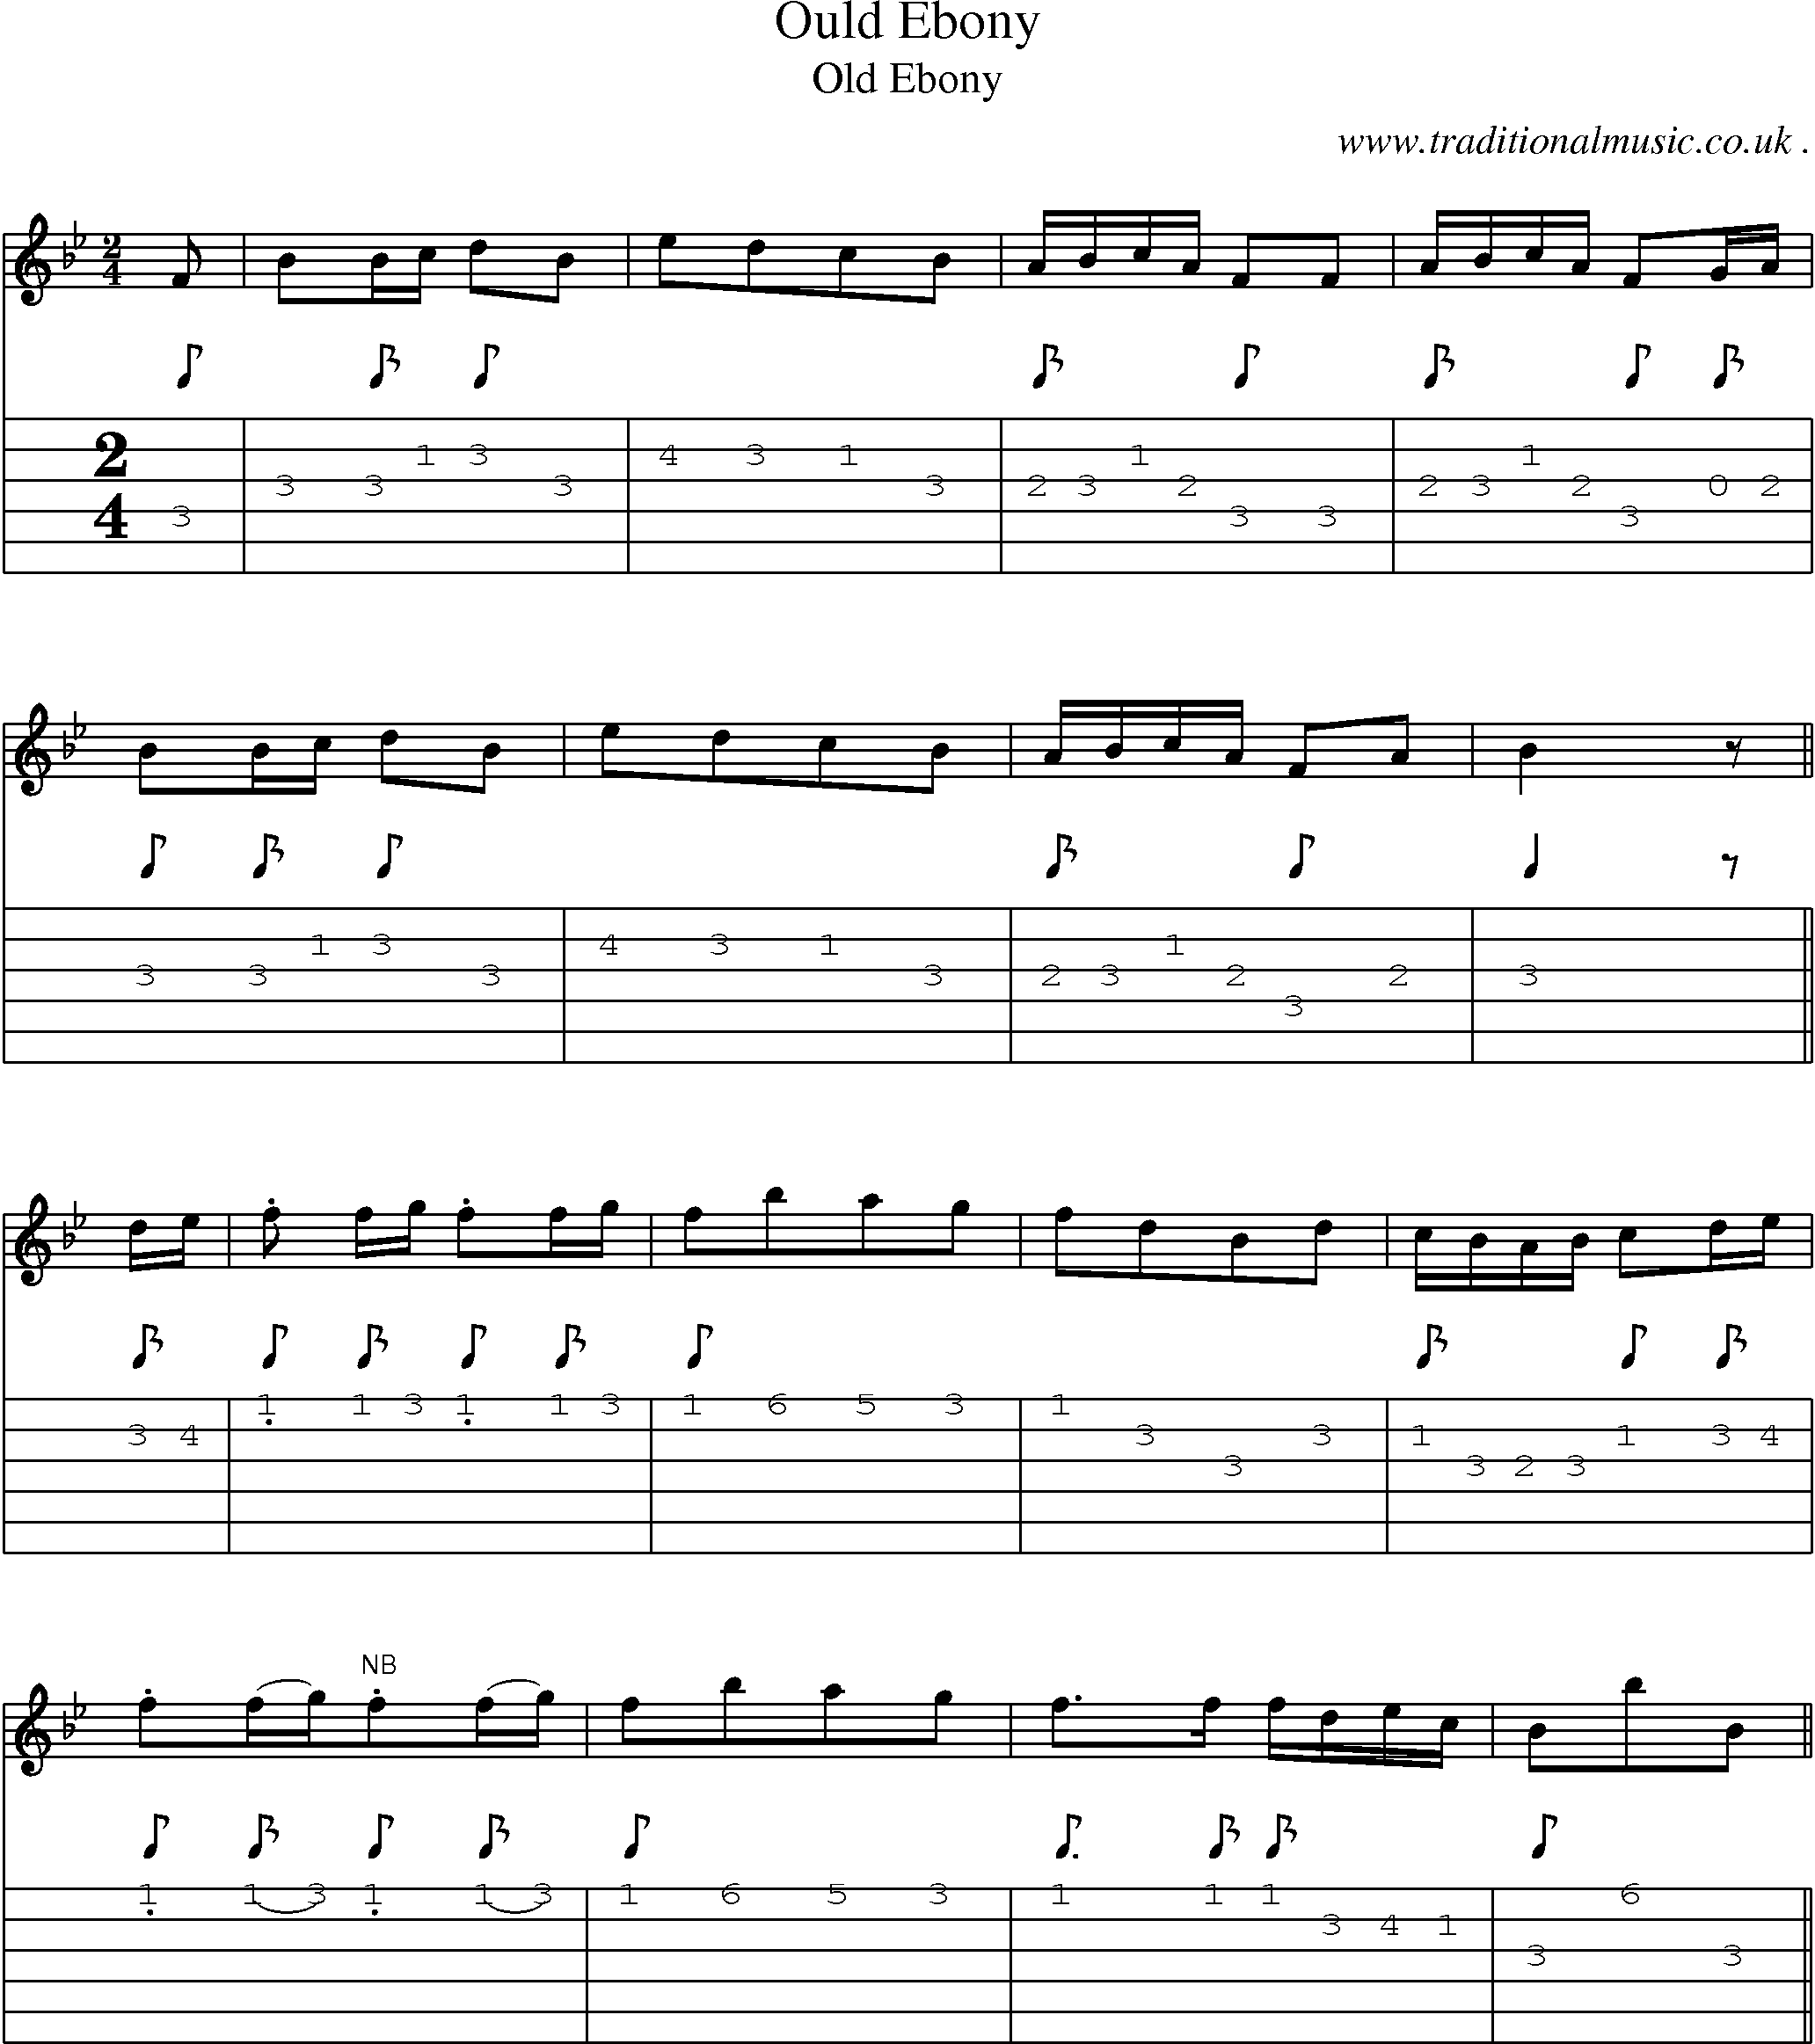 Sheet-Music and Guitar Tabs for Ould Ebony